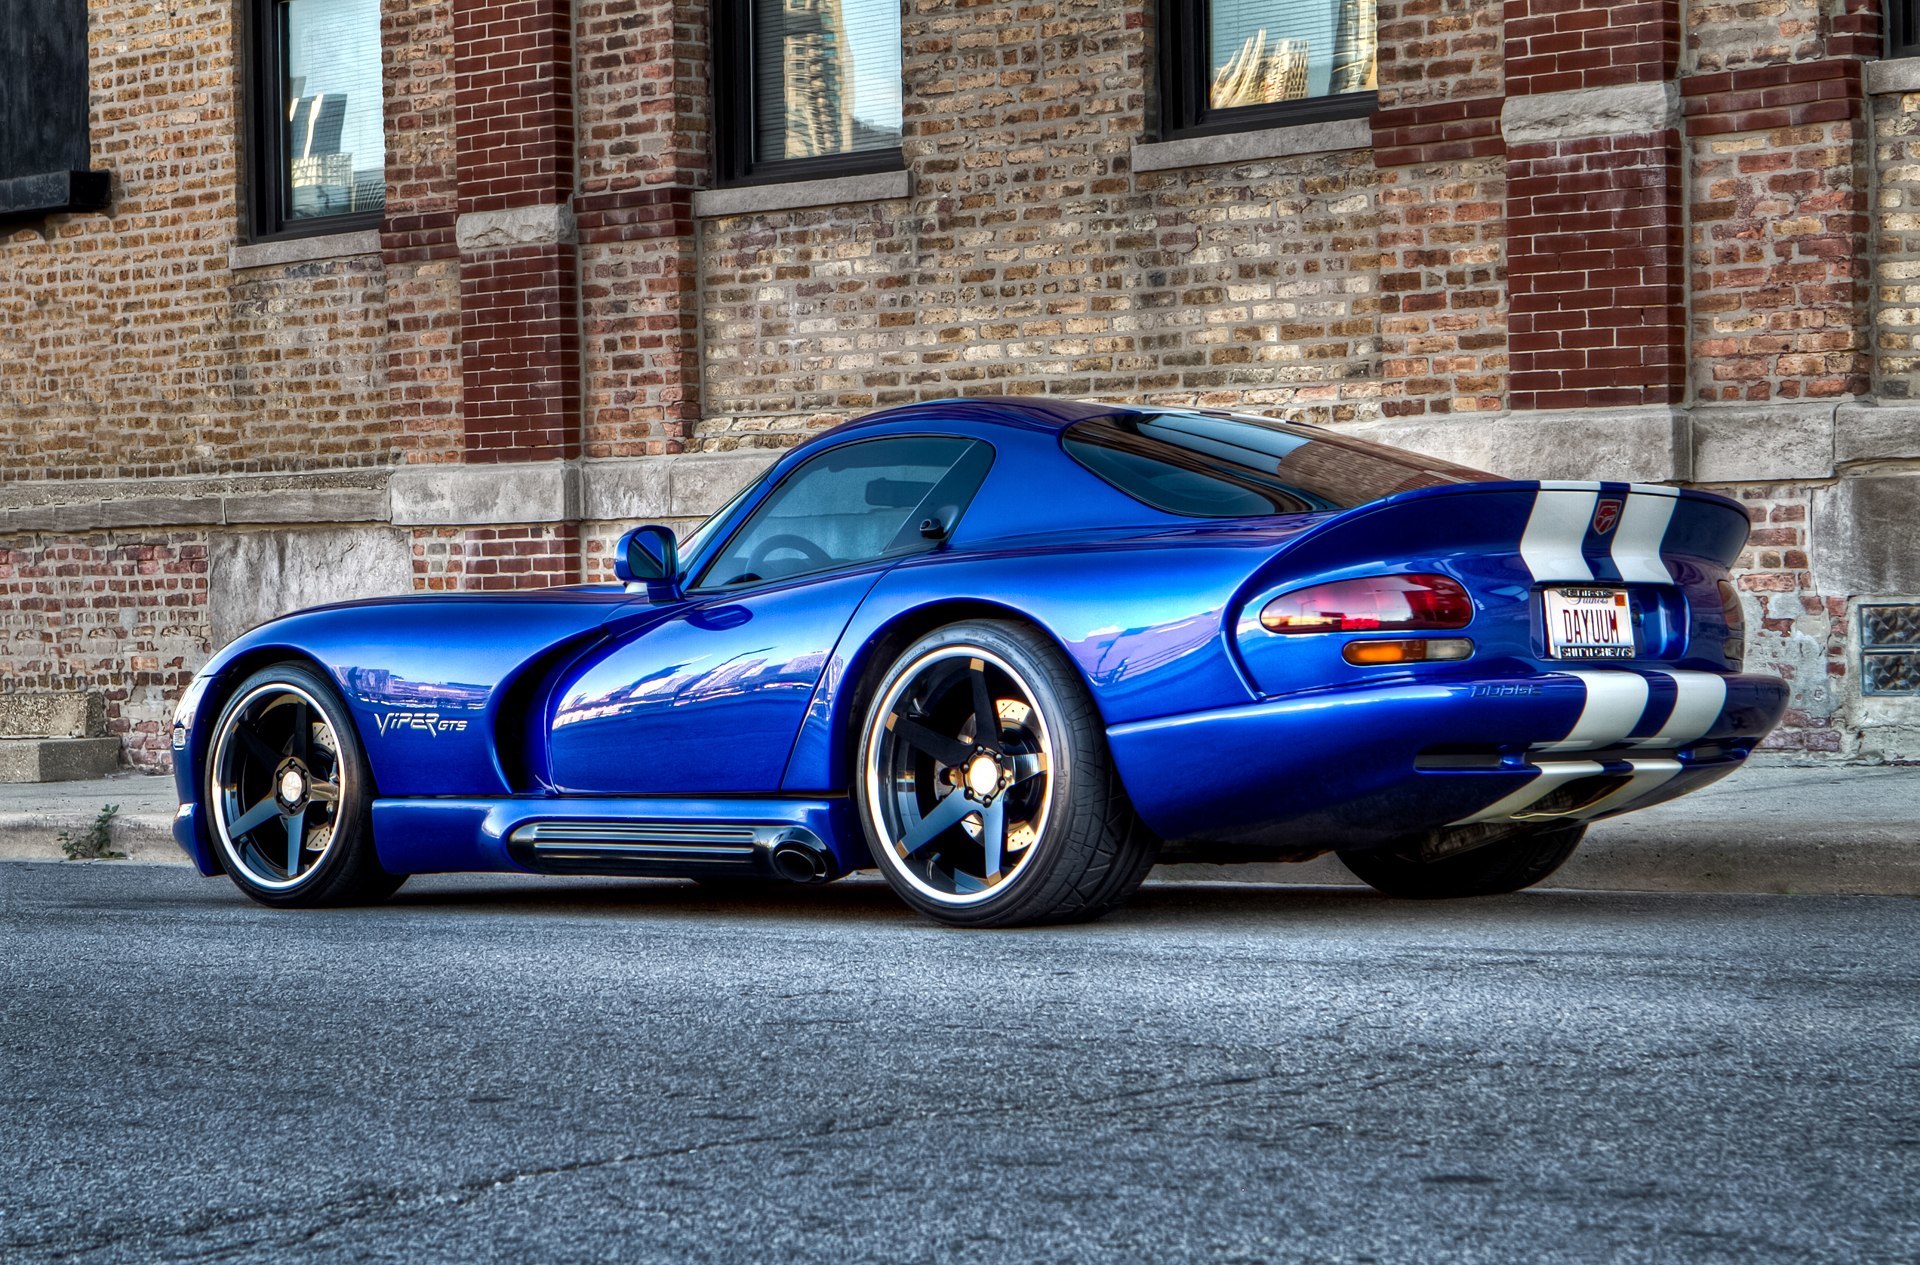 Wallpaper Viper Gts Dodge Blue Car Pictures And Photos